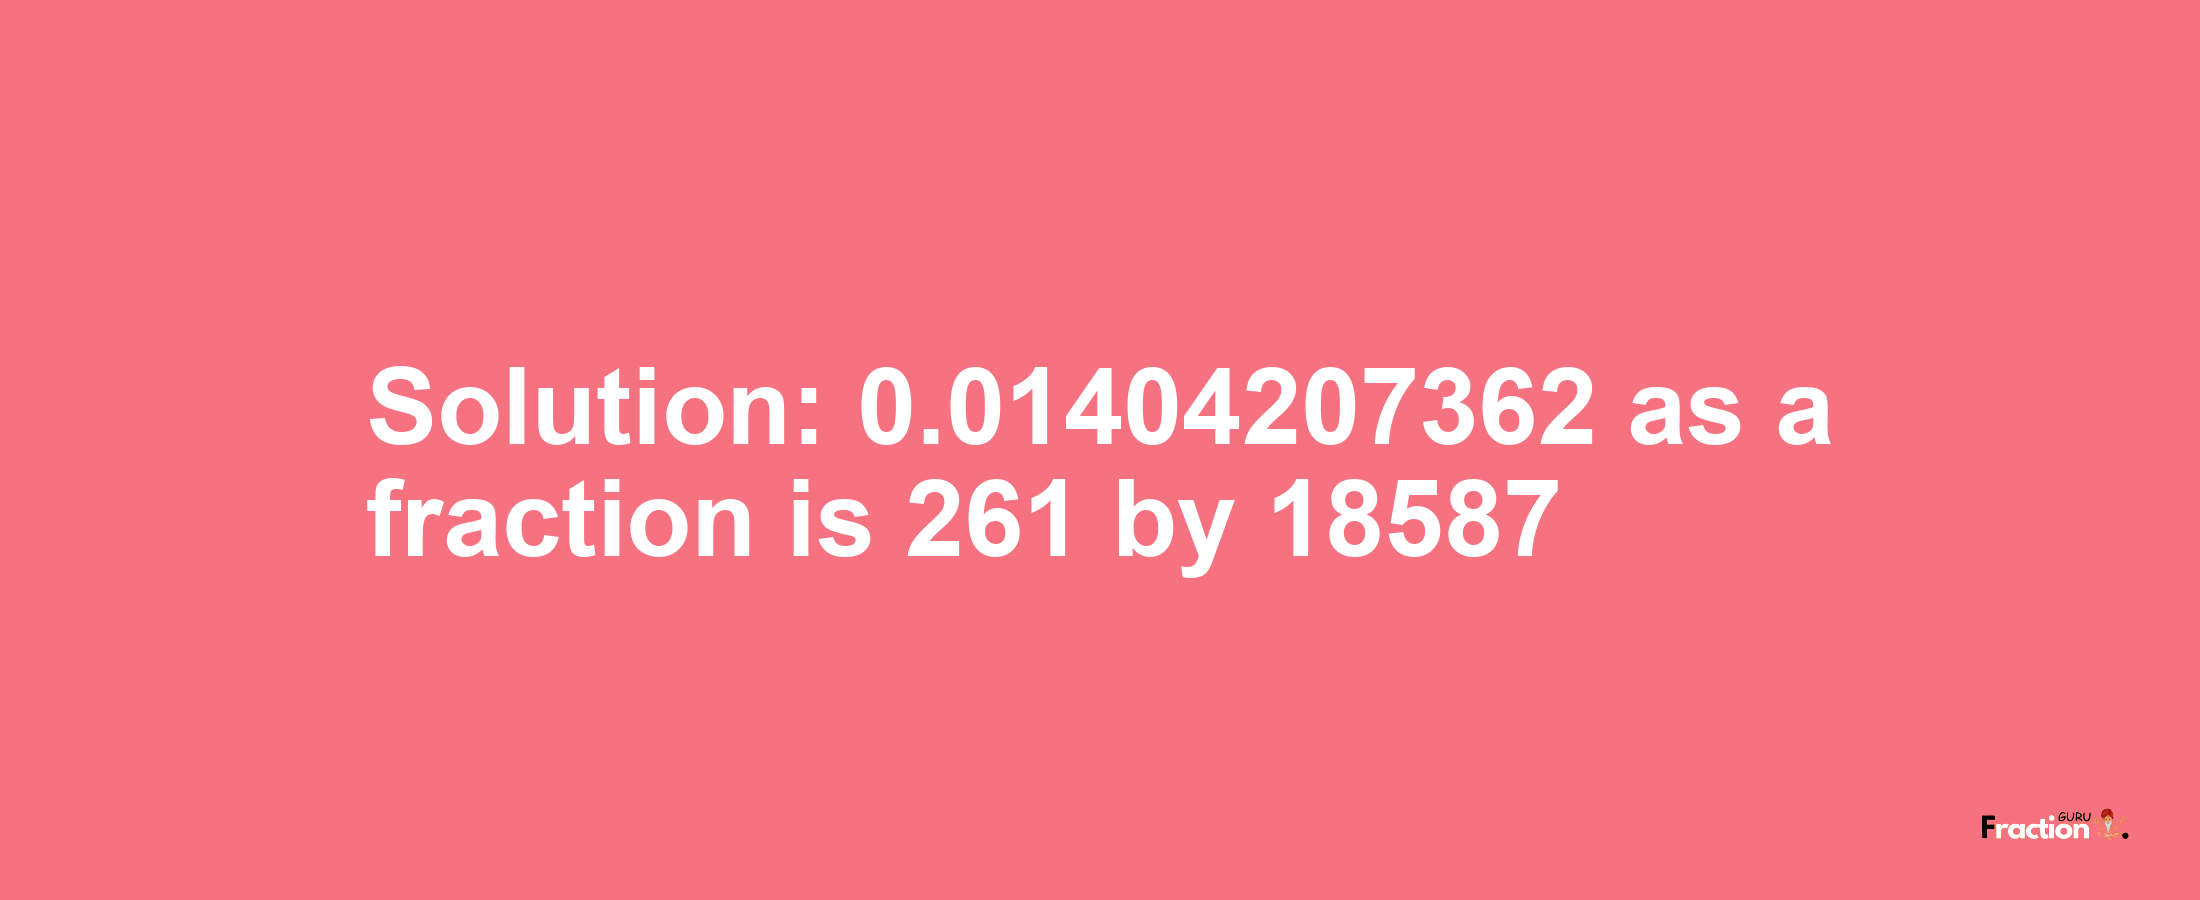 Solution:0.01404207362 as a fraction is 261/18587